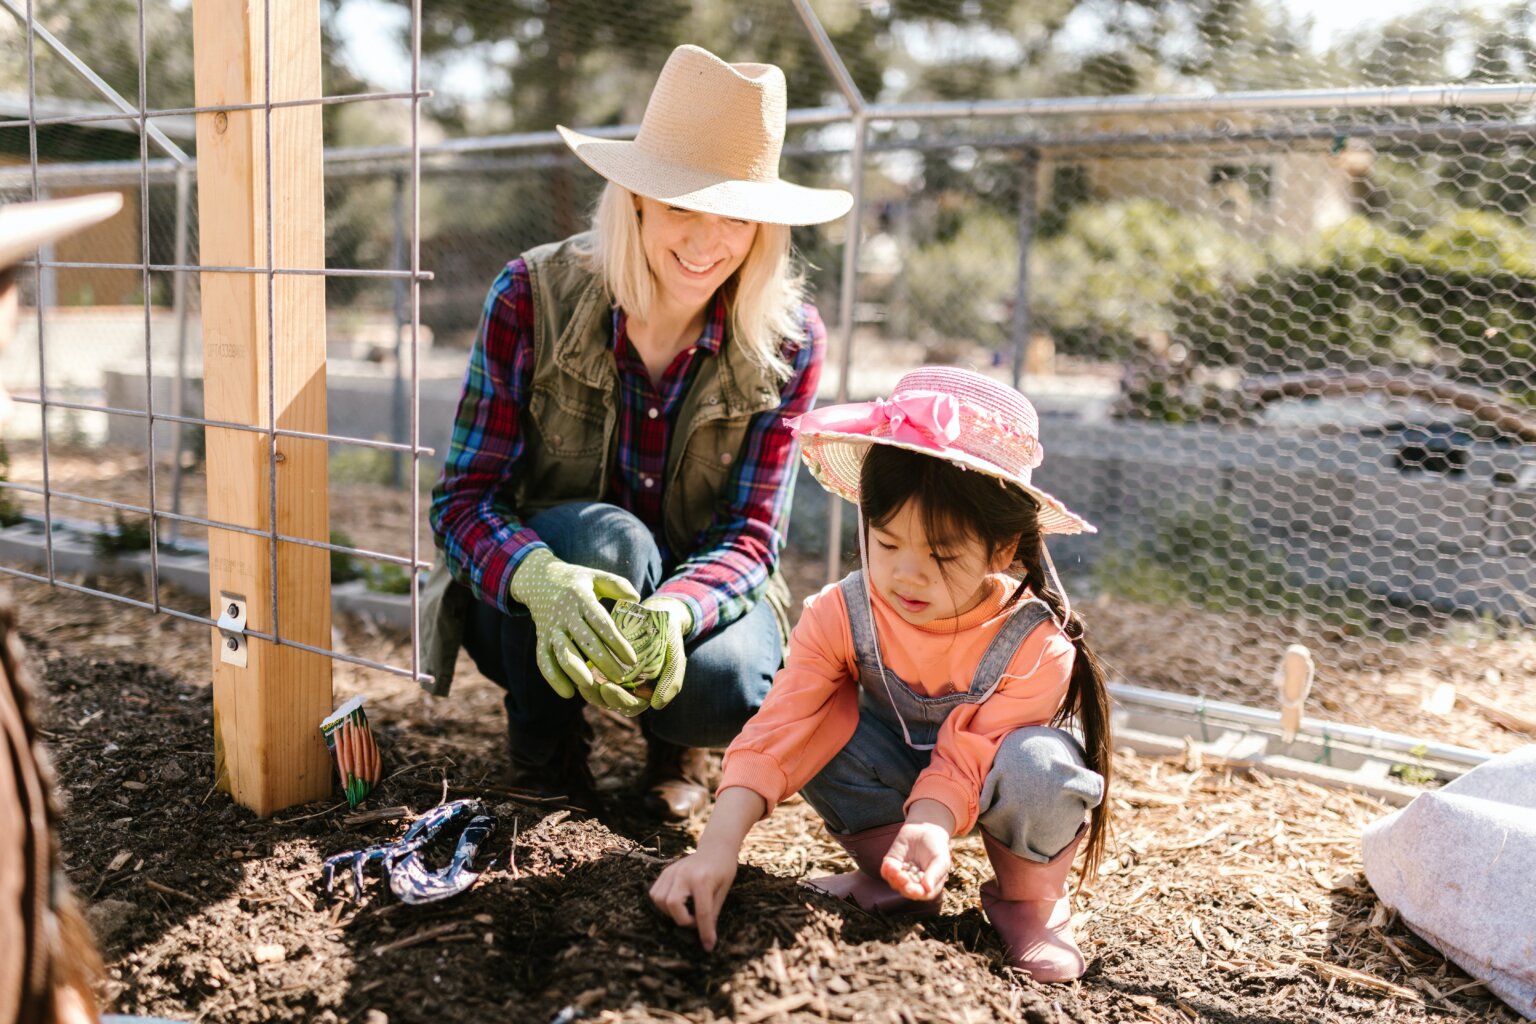 A woman and a child planting seeds.